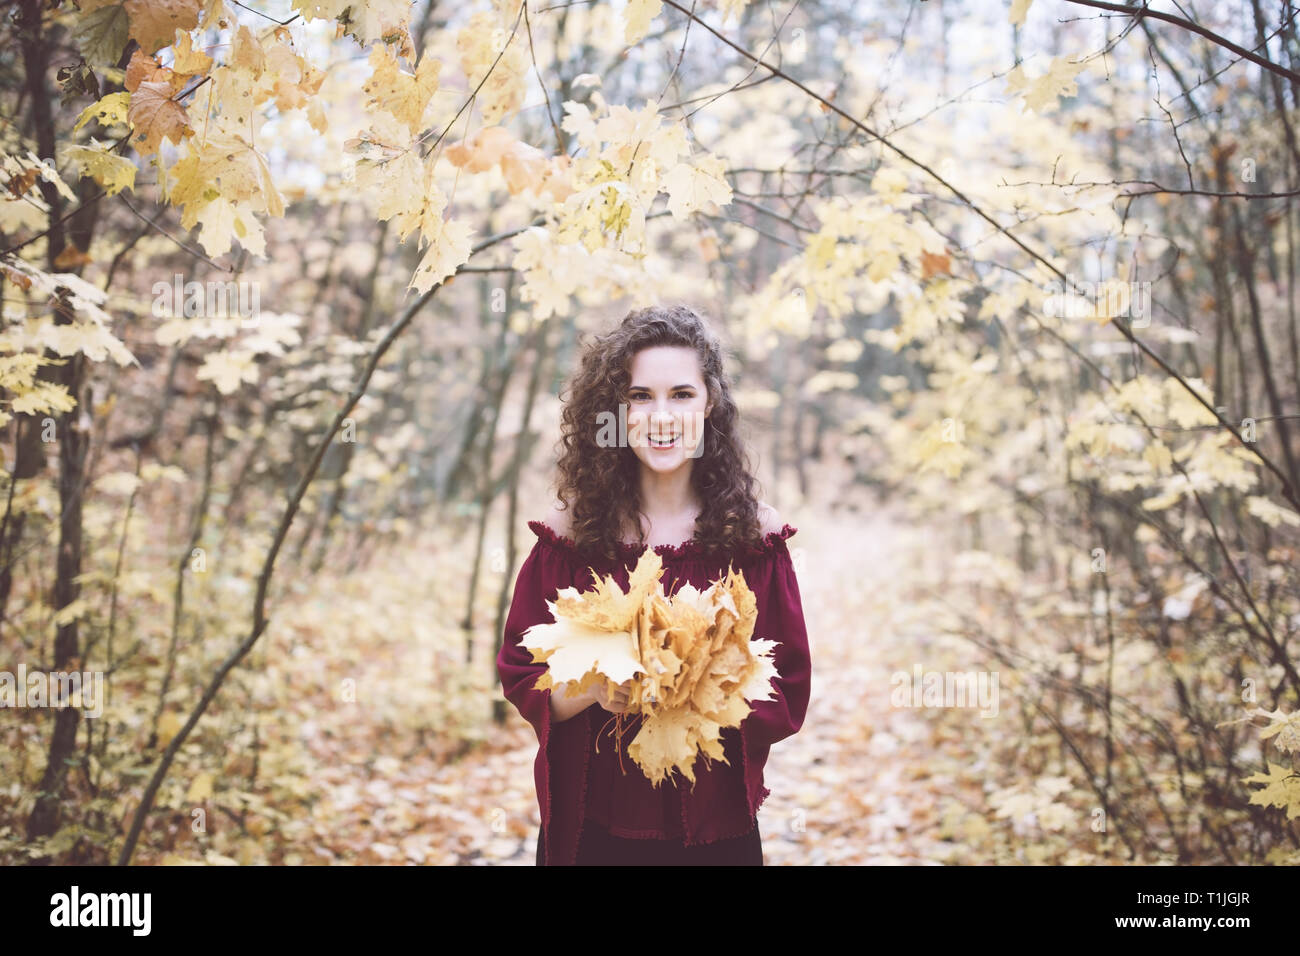 Beautiful girl with curly dark hair in a maroon top in an autumn park holding maple leaves and smiling Stock Photo